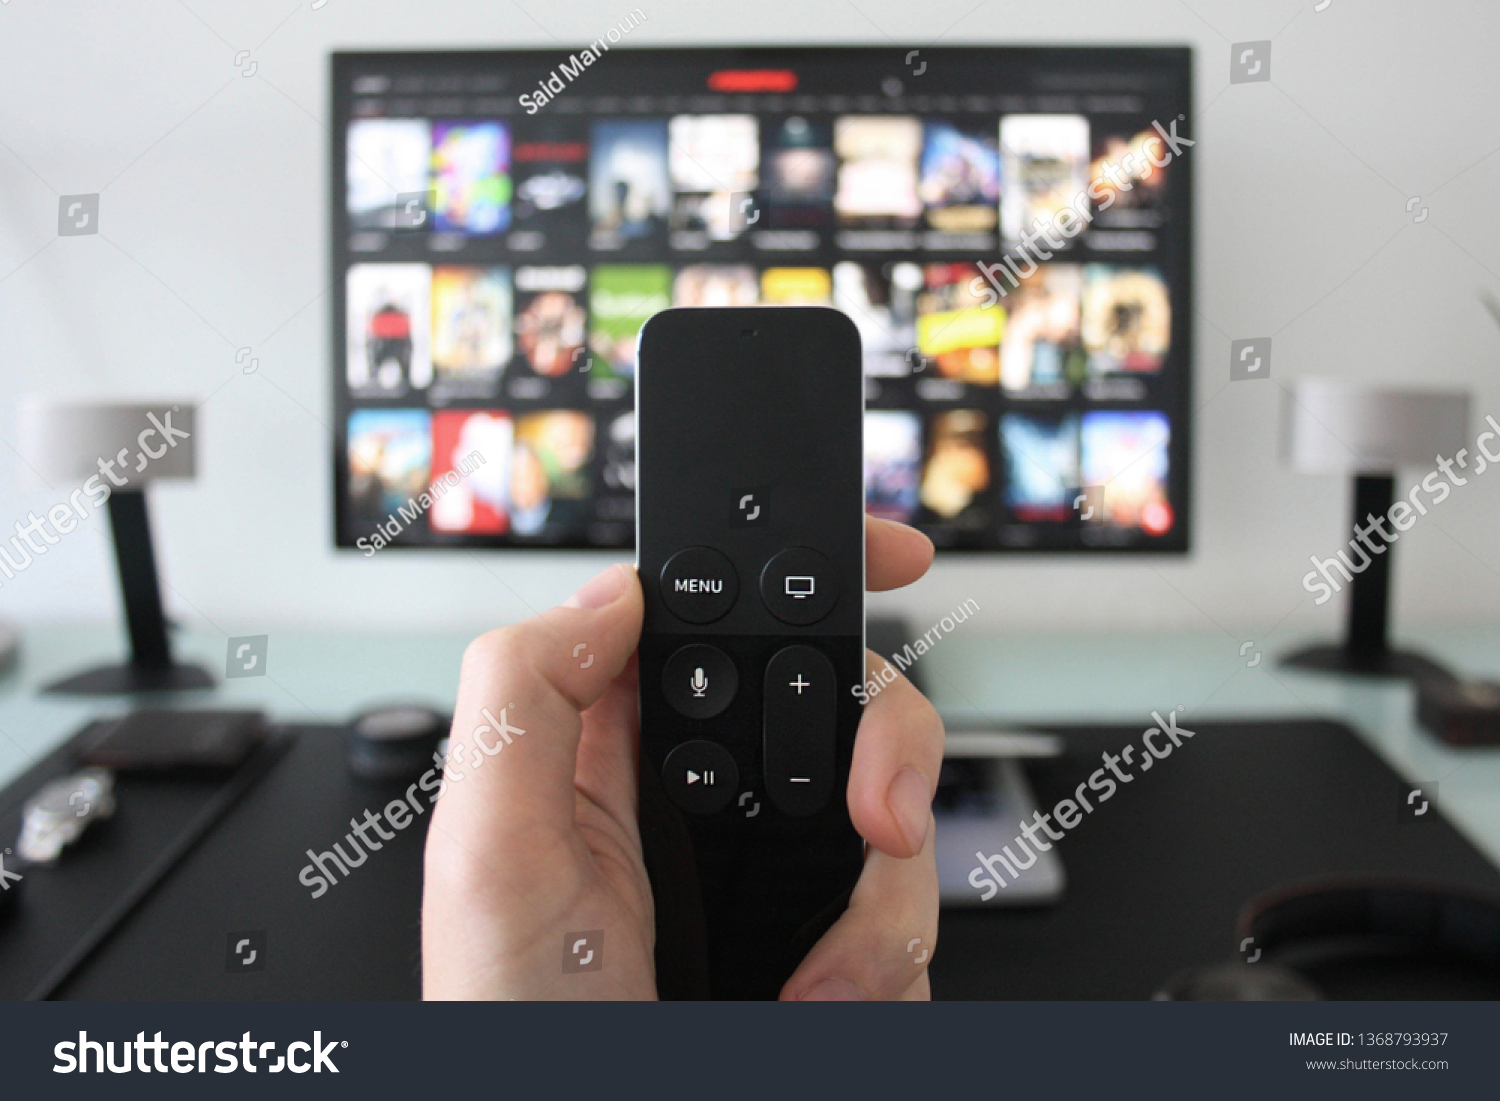 Hand holding a TV remote while watching shows on a streaming service on Television. #1368793937